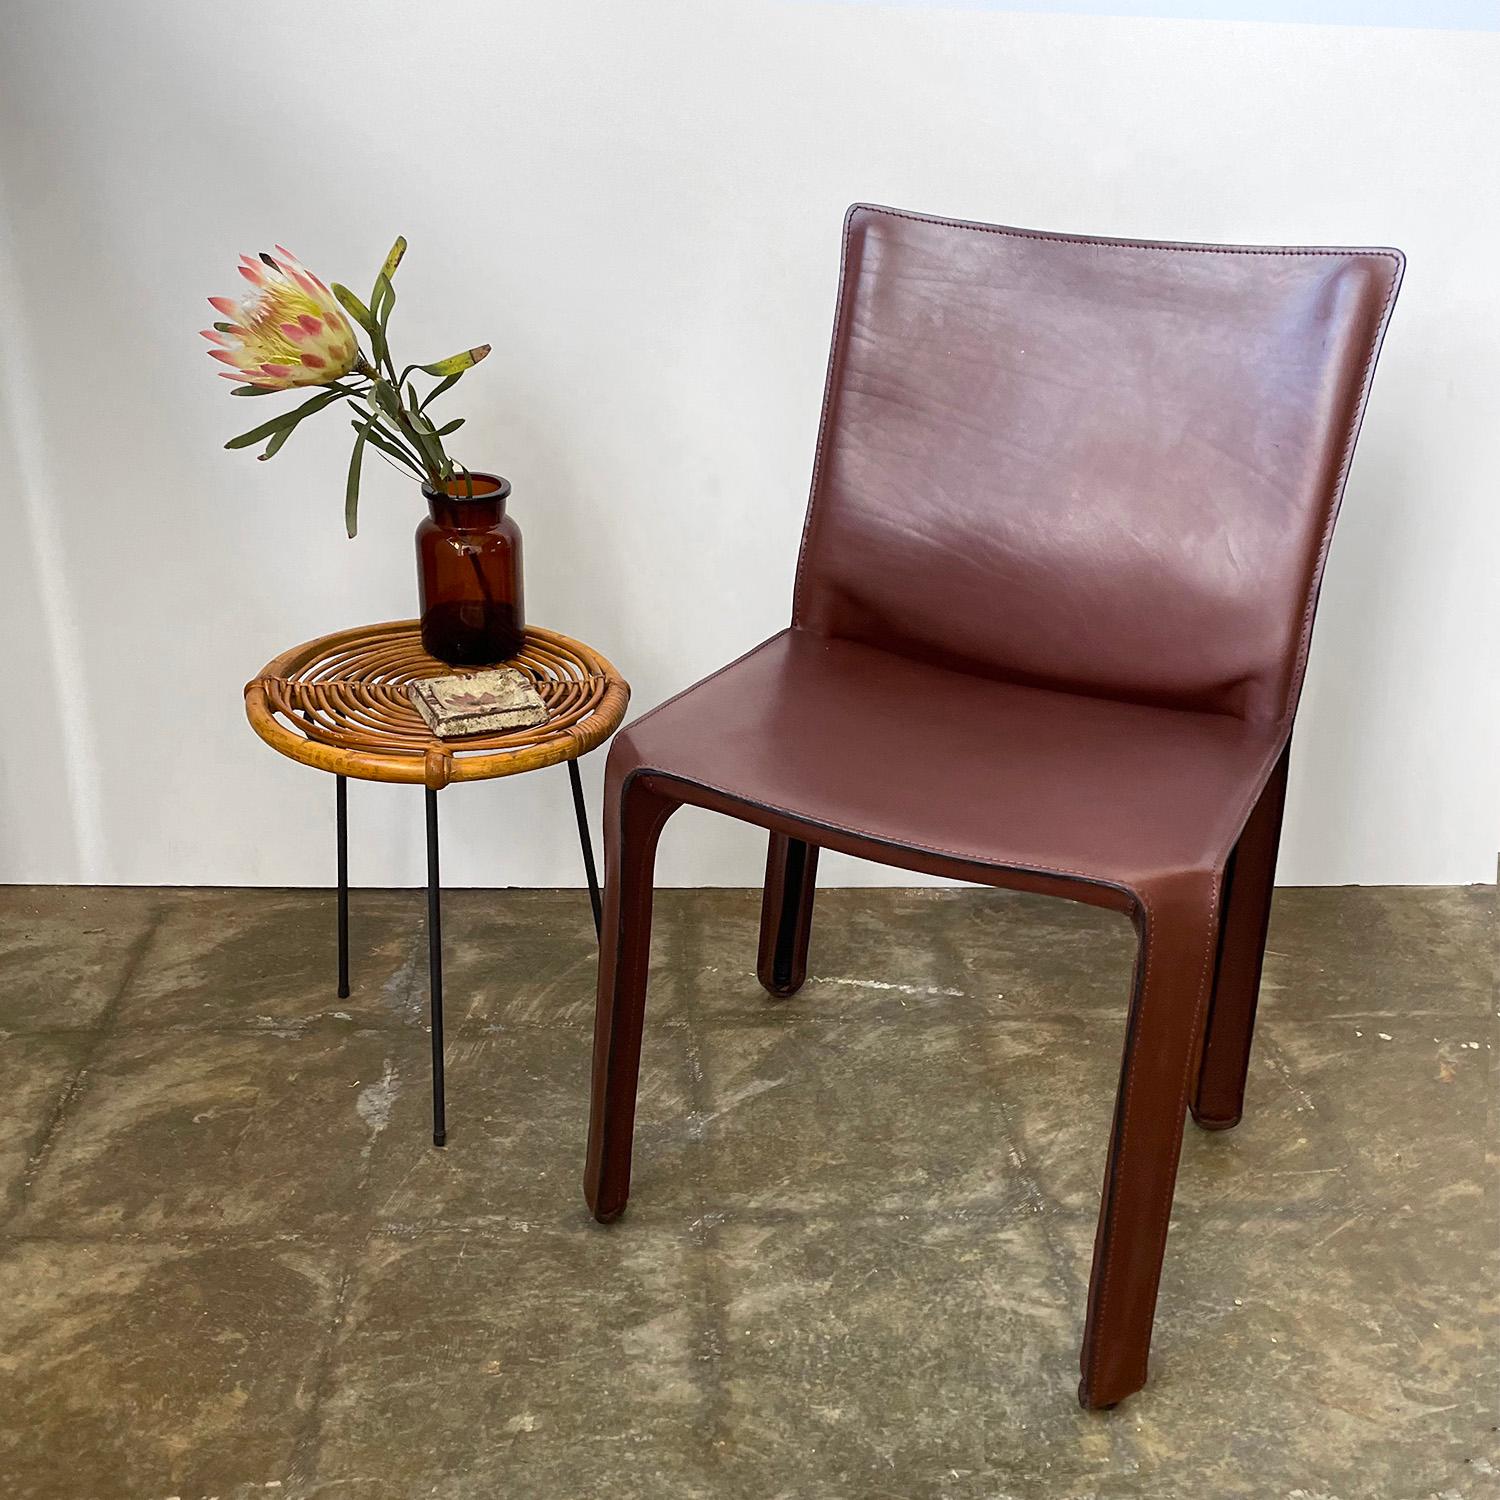 Mario Bellini cab chair manufactured by Cassina
Italy, circa 1970’s
Buttery soft, newly reconditioned, Oxblood leather
Perfectly worn in from years of use
Light patina
Marked identification
Listing is for single chair
Additional single Bellini chair